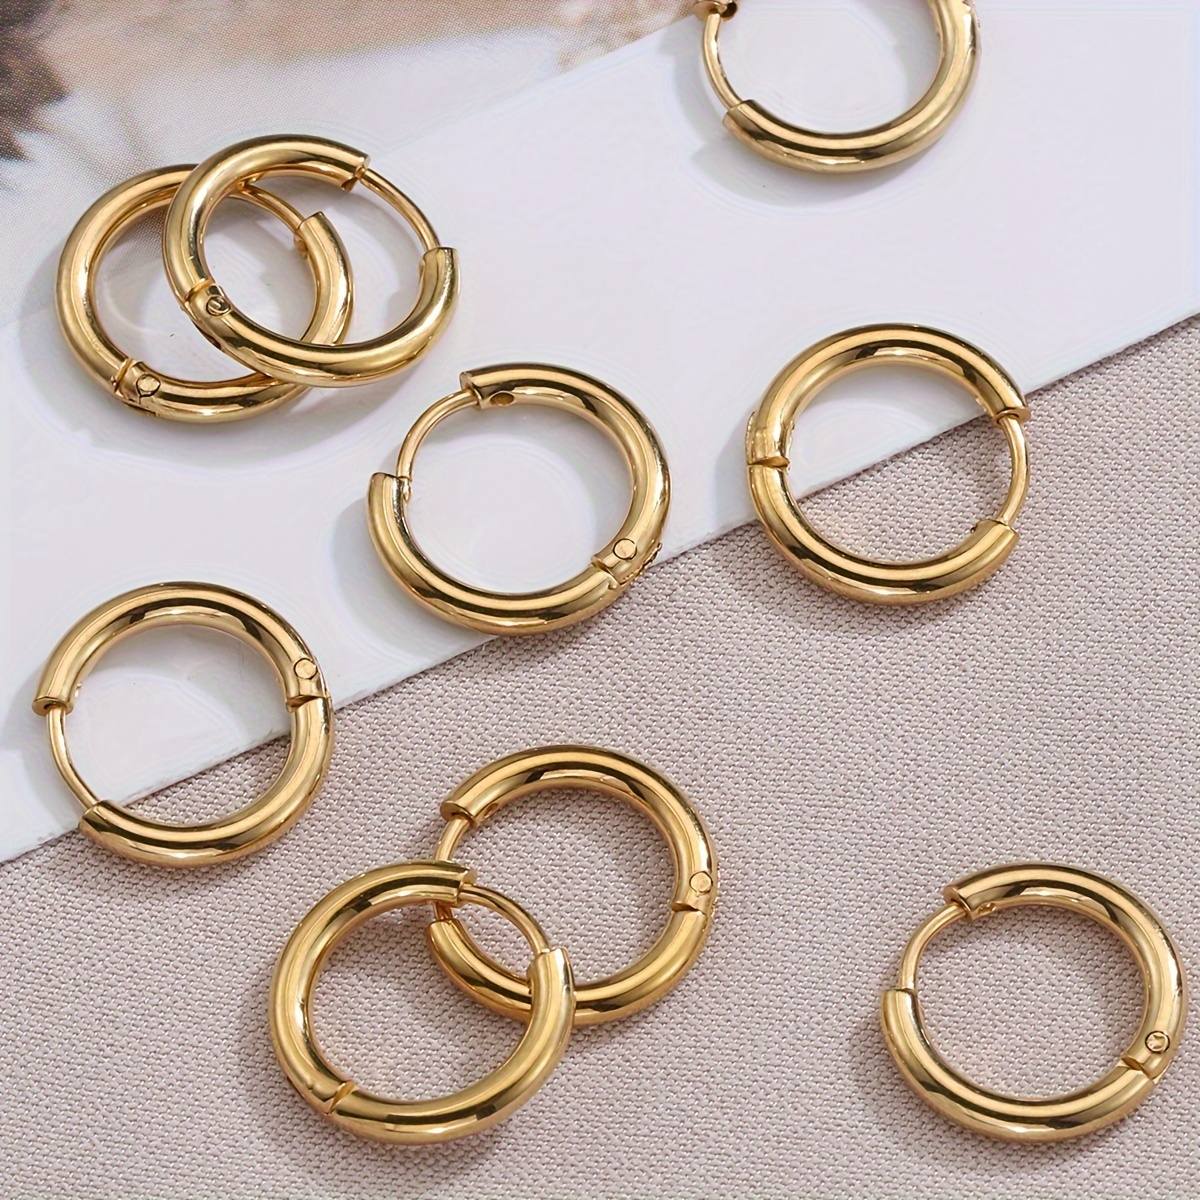 

10pcs Stainless Steel Small Hoop Earrings Golden Color Round Circle Pendant Buckle Earring Hoops For Diy Earring Jewelry Making Supplies